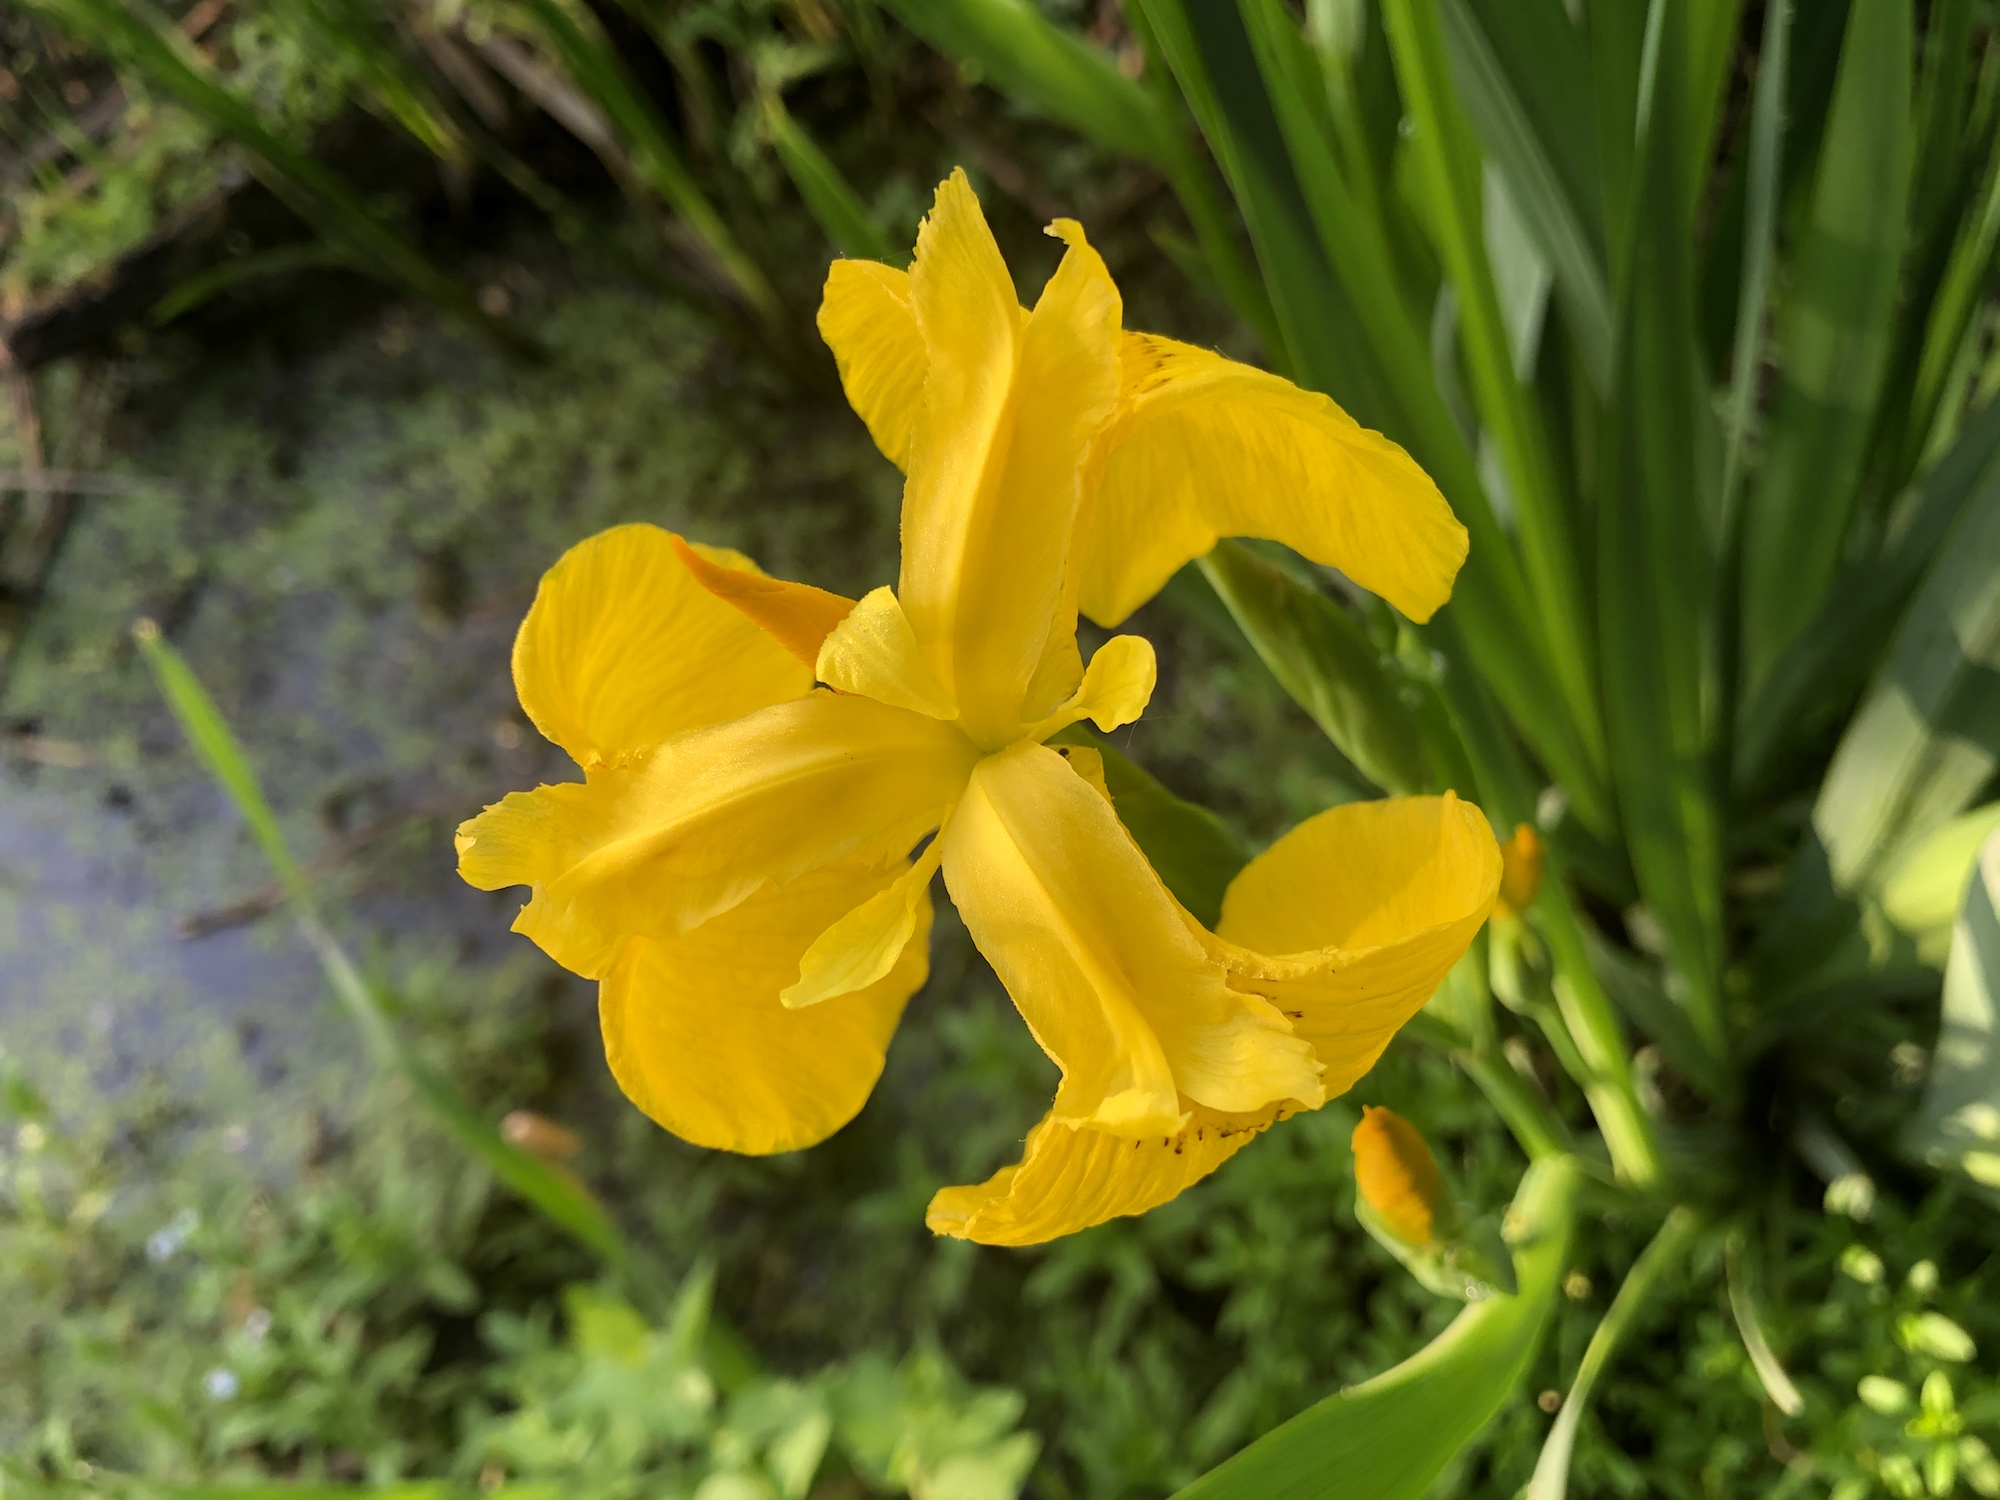 Yellow Flag Iris by Cattails on Lake Wingra on June 4, 2020.